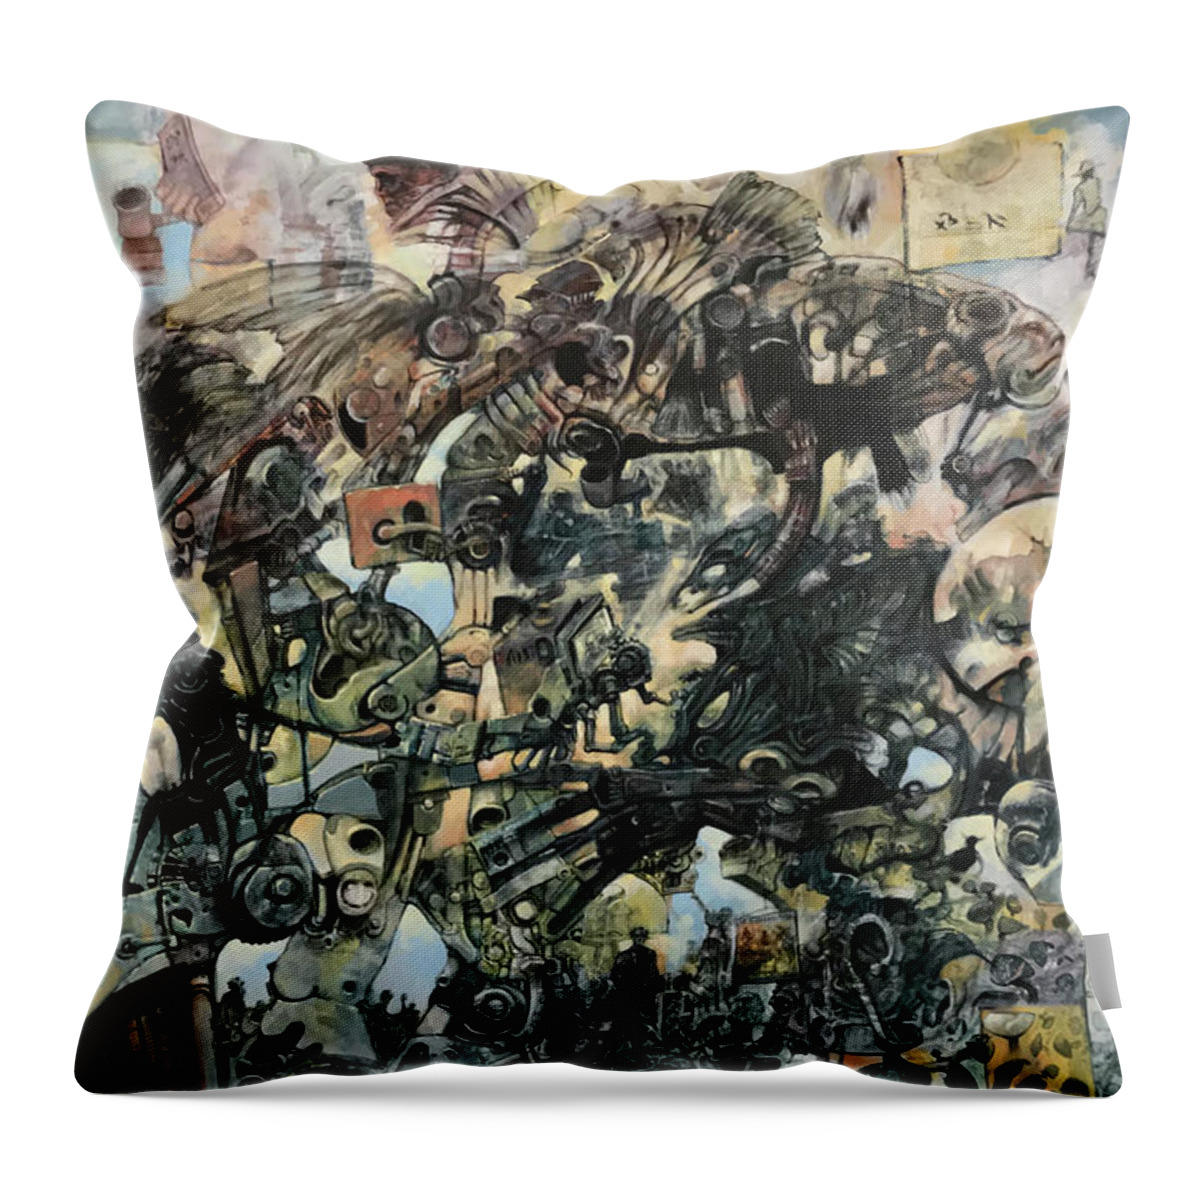 Raven Throw Pillow featuring the painting Pandemonium by William Stoneham